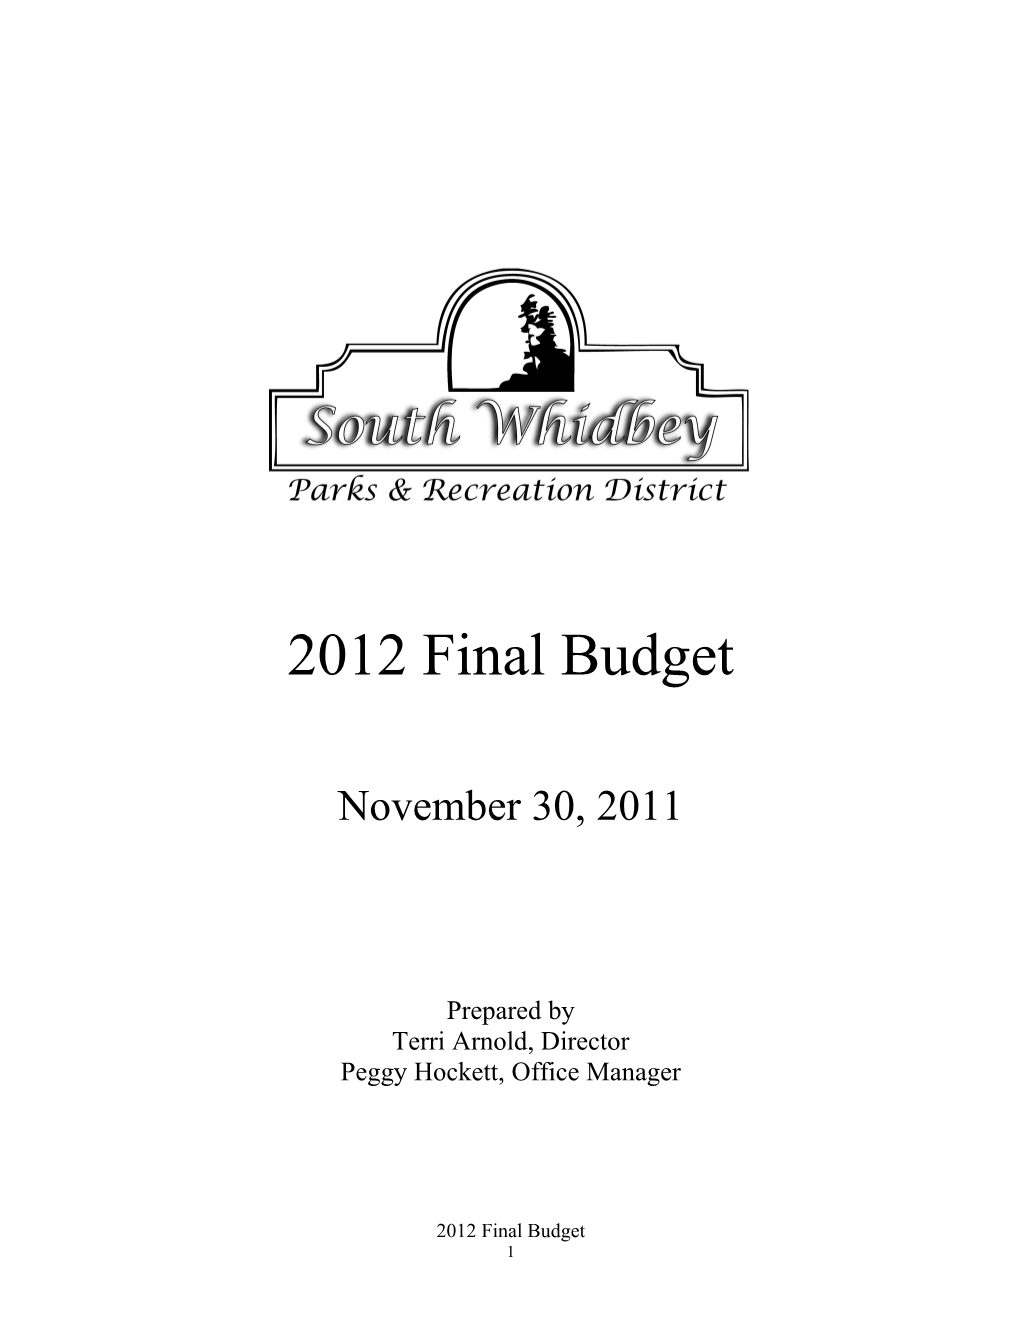 South Whidbey Parks & Recreation District 2002 Final Budget Prepared by Suzette Hart, Director